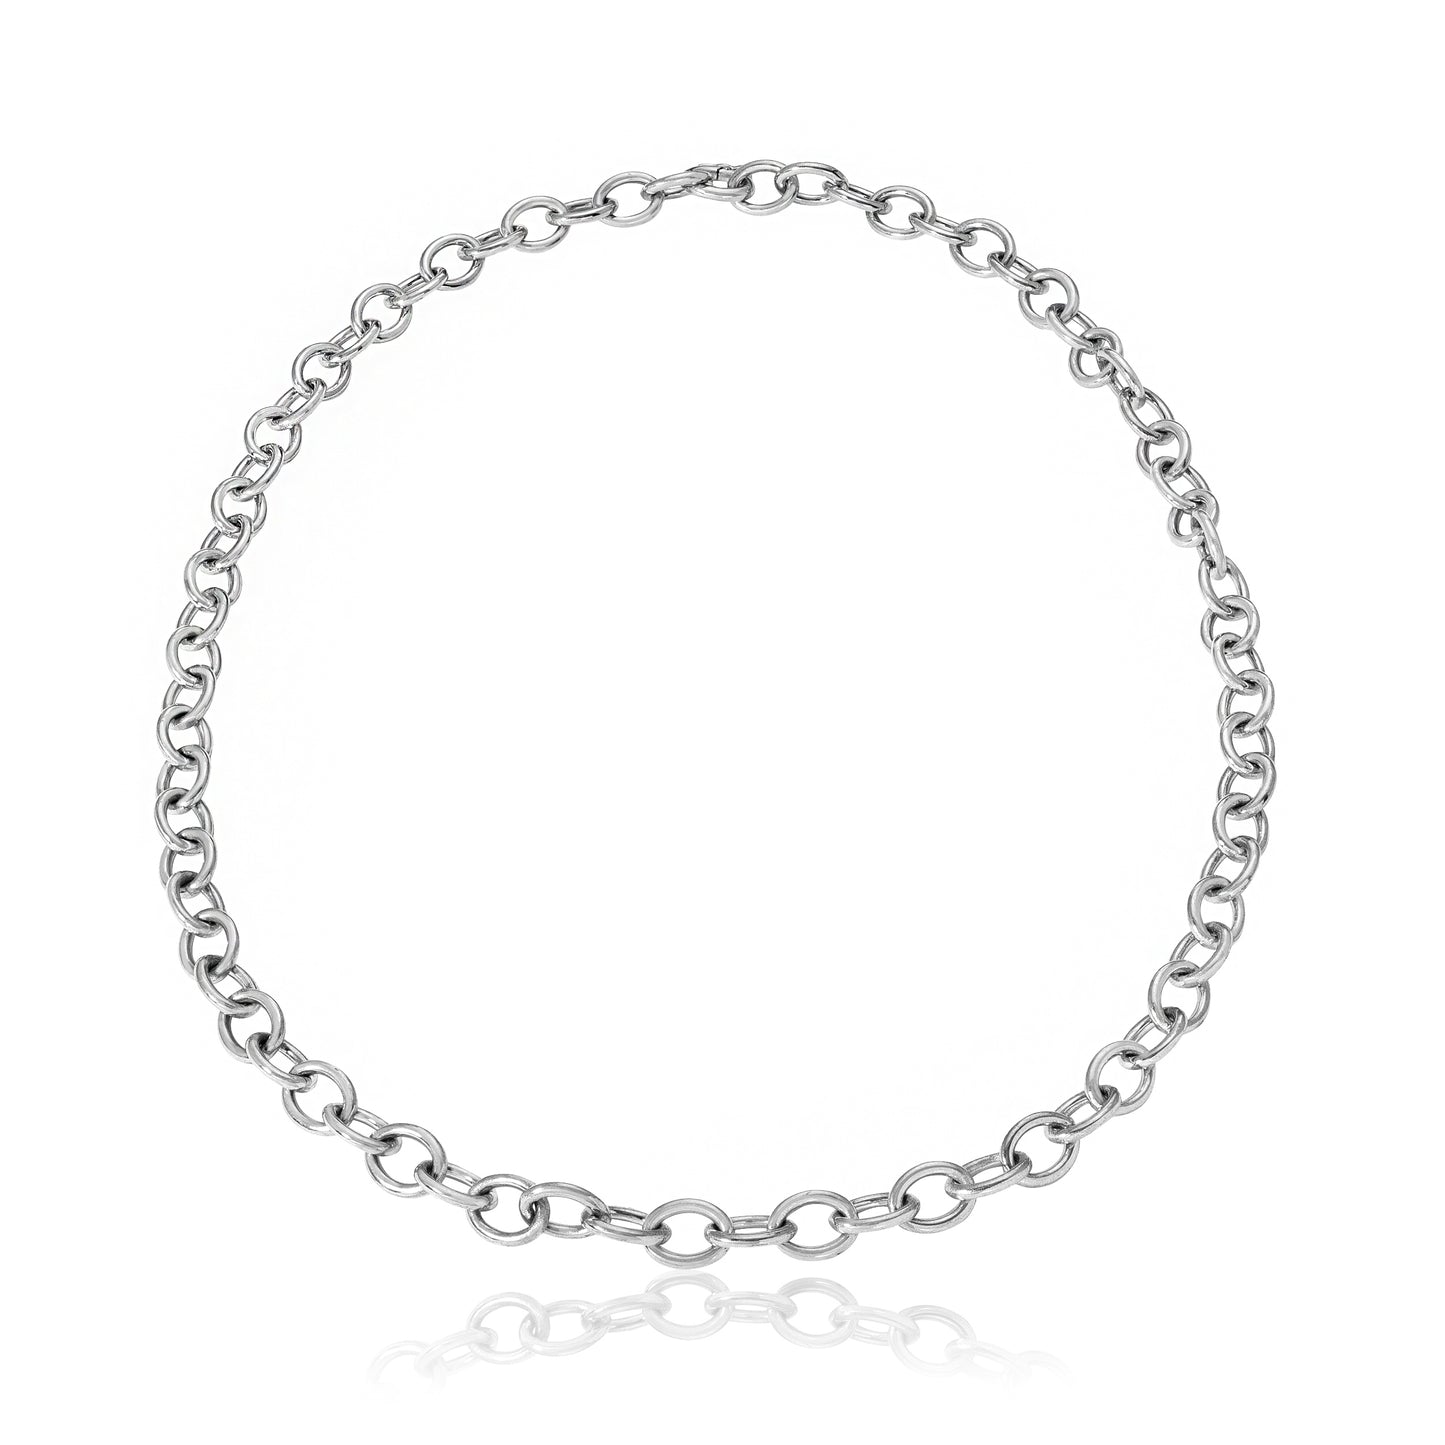 Chubby Oval Link Necklace, Silver